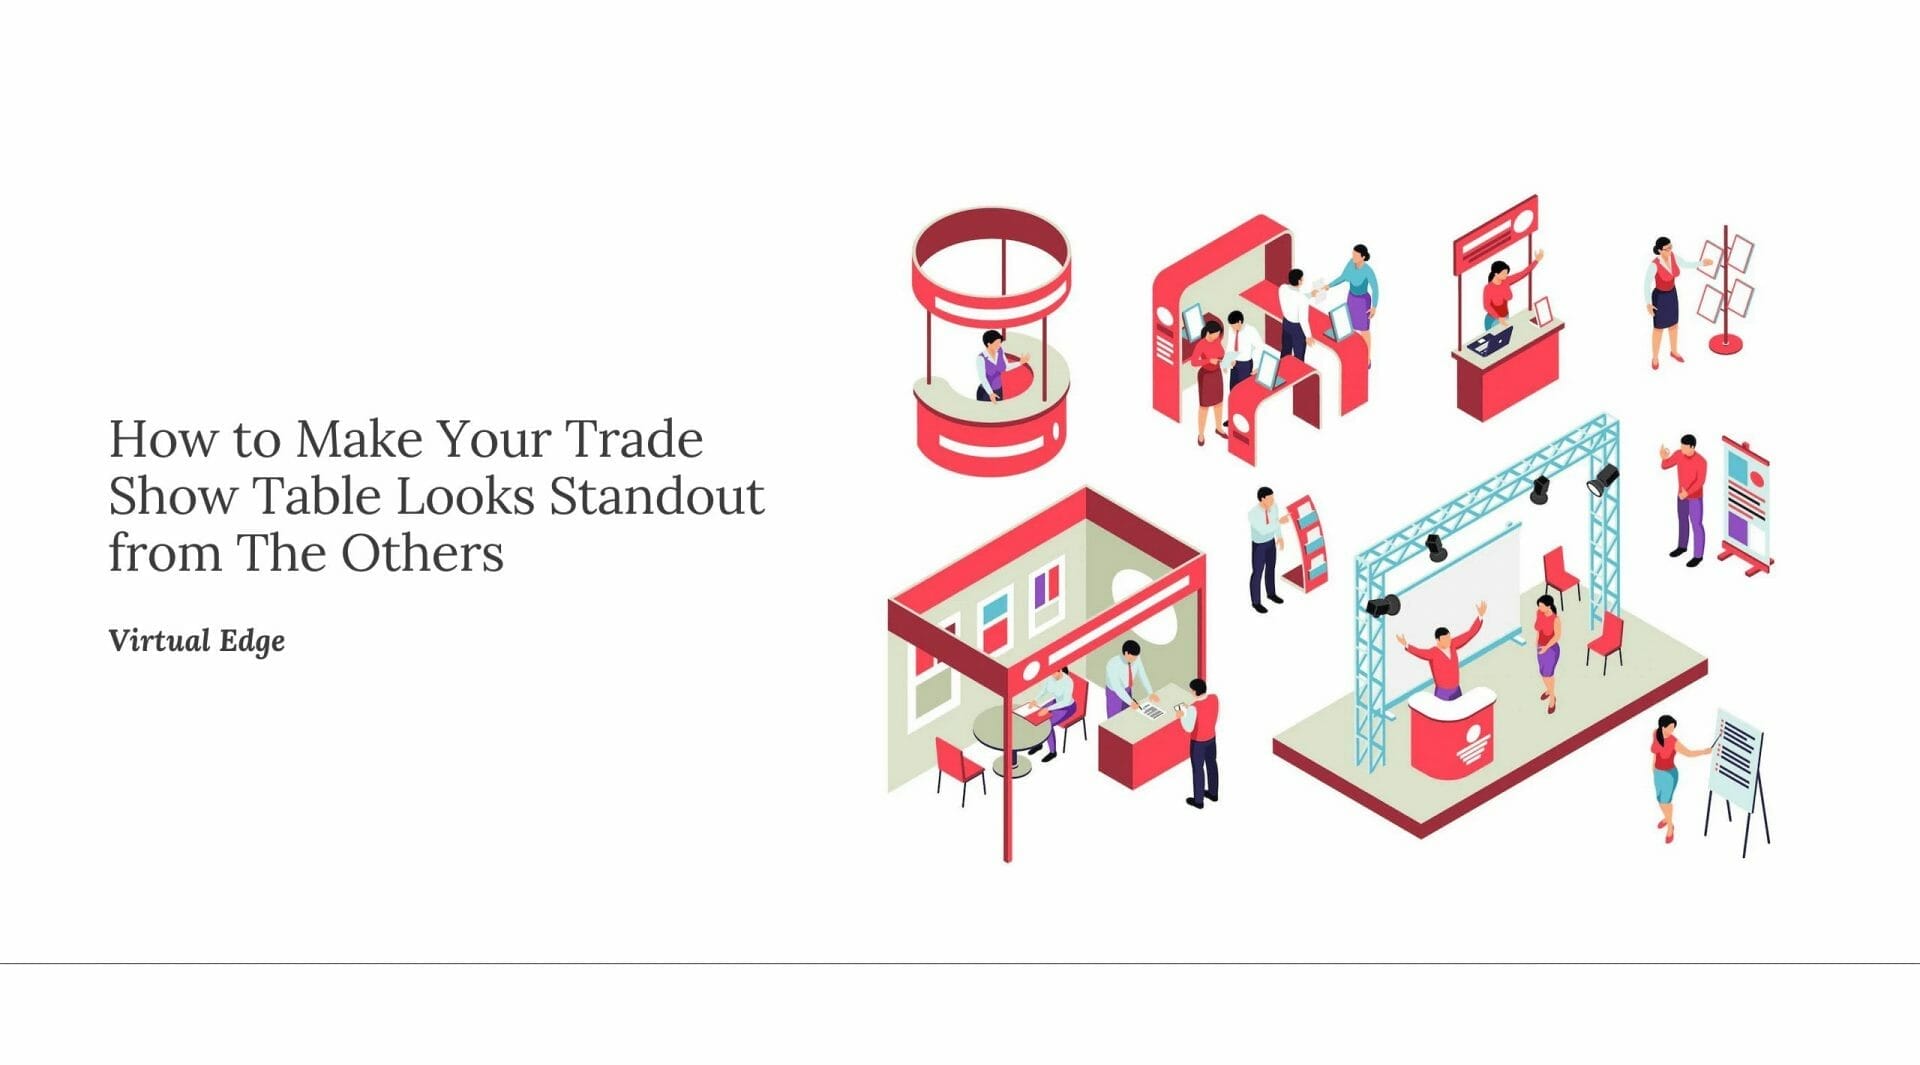 How to Make Your Trade Show Table Looks Standout from The Others